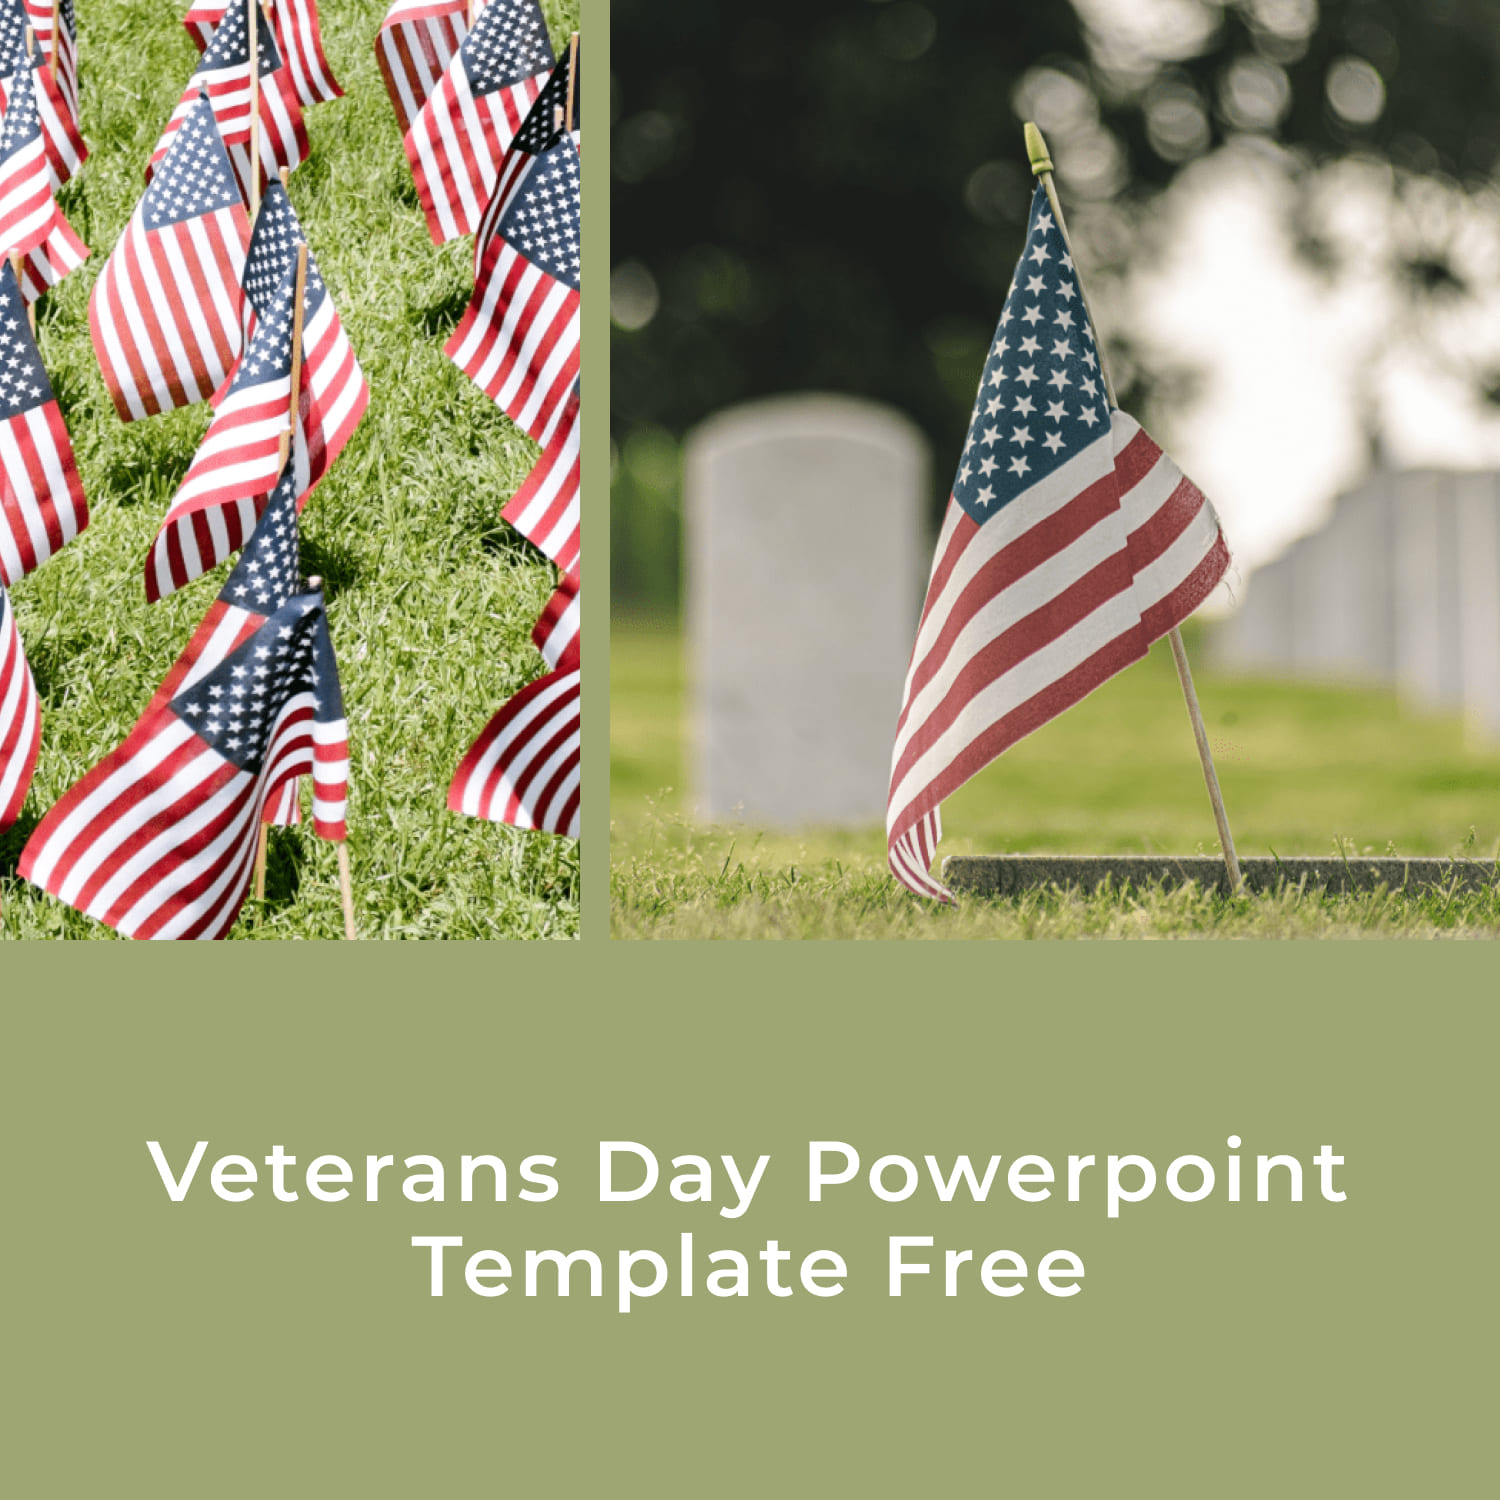 1500 1 Veterans Day Powerpoint Template Free.